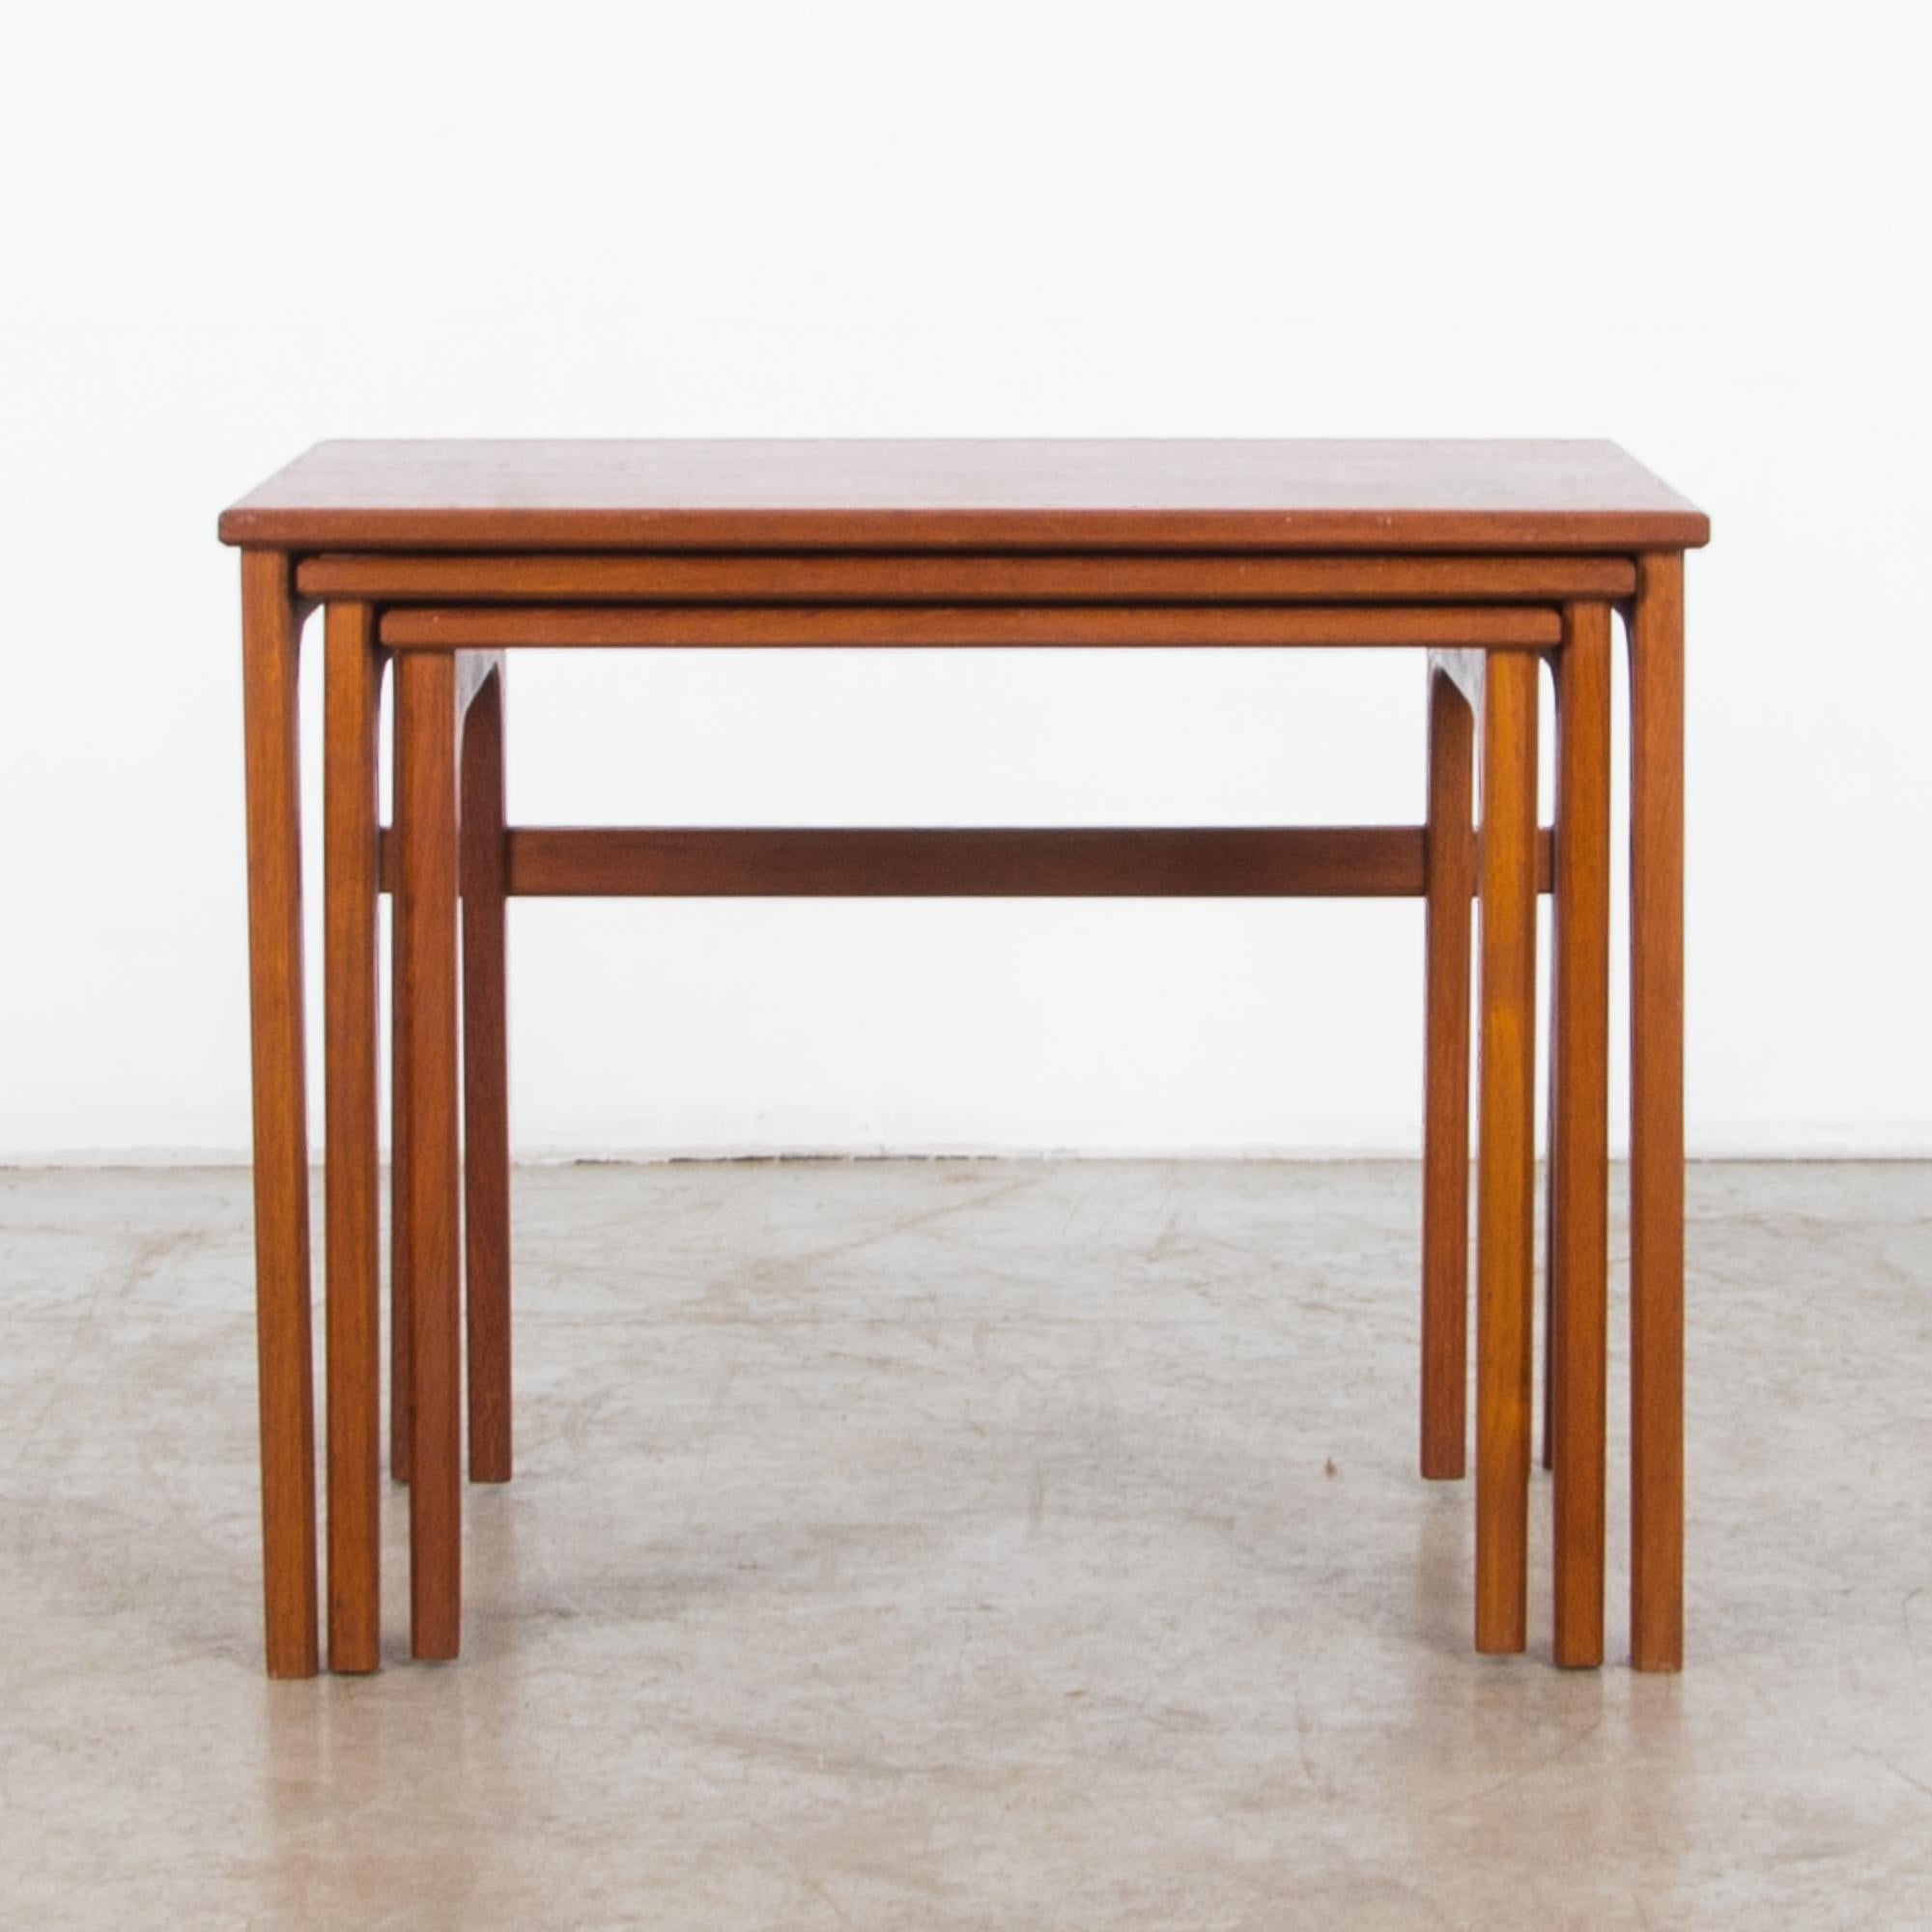 This set of wooden nesting tables was designed in Denmark in the 1970s. The pragmatic simplicity of the design is a stamp of Scandinavian Modernism; a simple rectangular tabletop sits atop smoothly tapered legs, which meet at two sides of the table